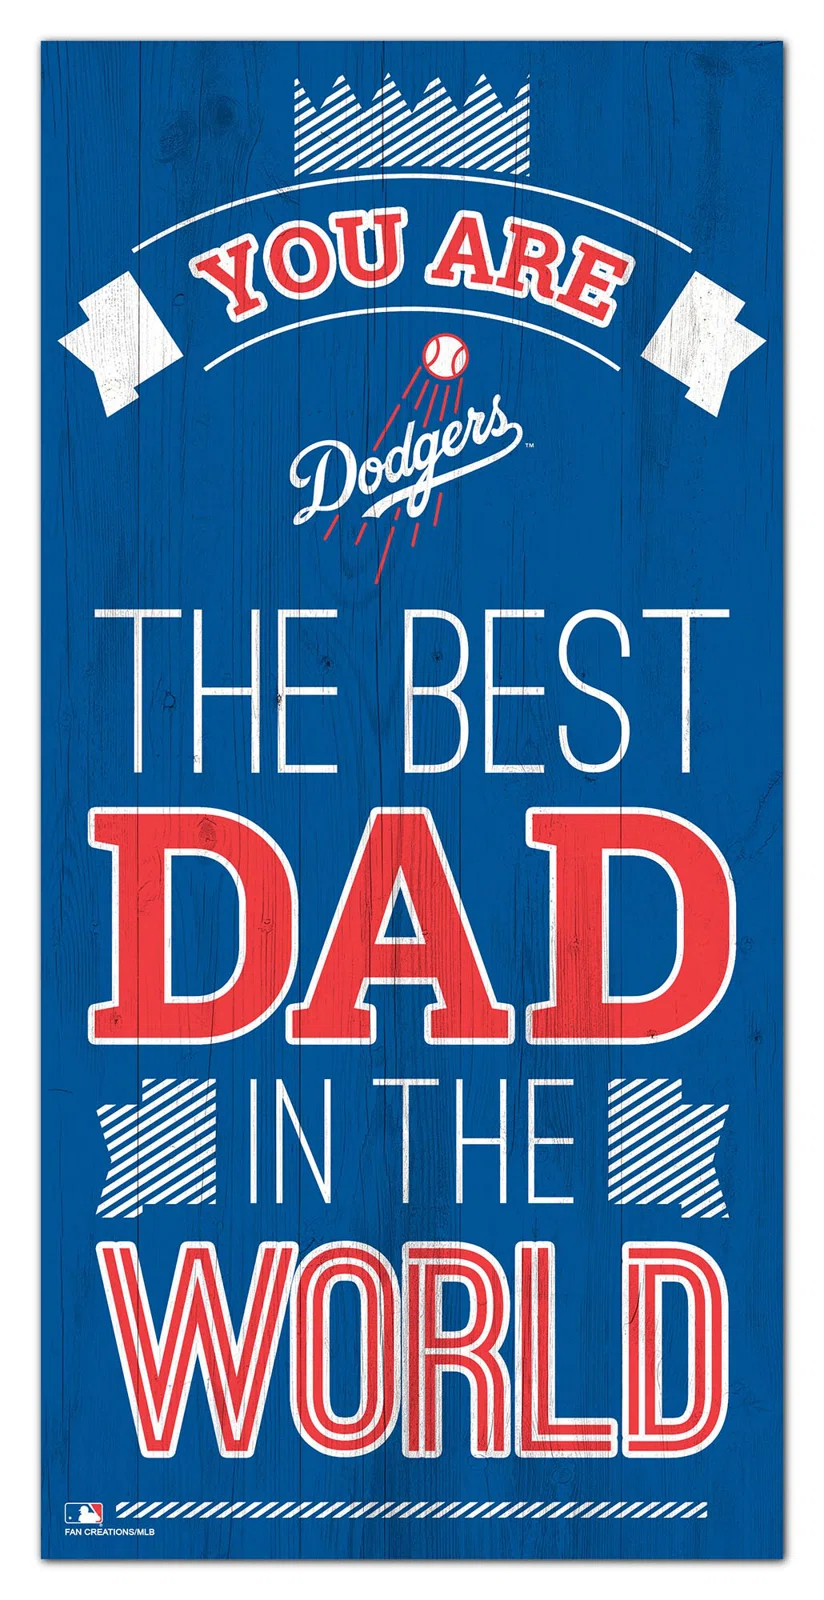 LOS ANGELES DODGERS BEST DAD IN THE WORLD 6"X12" SIGN